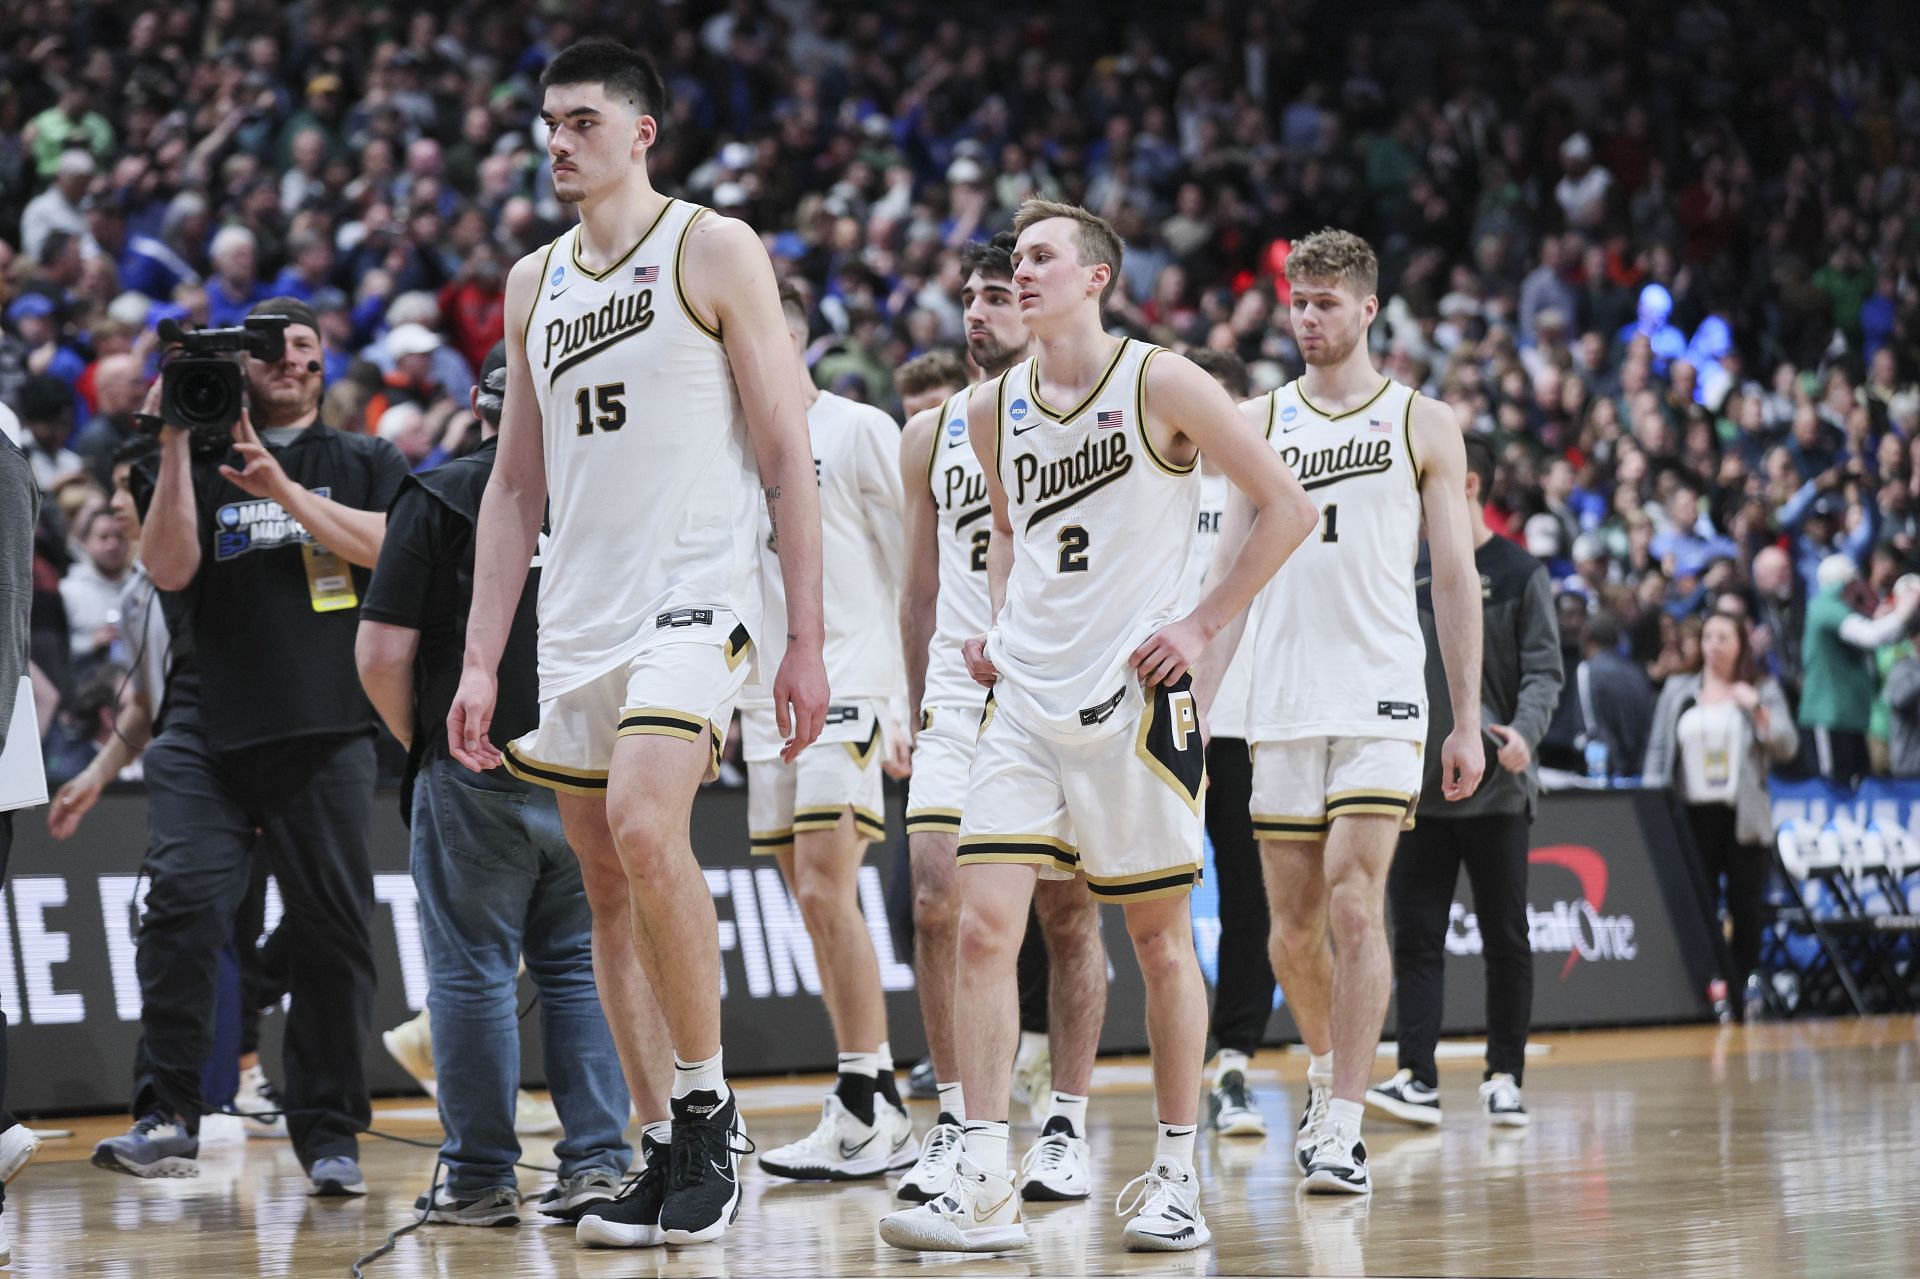 Zach Edey and No. 1 seeded Purdue lost to No. 16 Fairleigh Dickinson University (March 17, 2023)